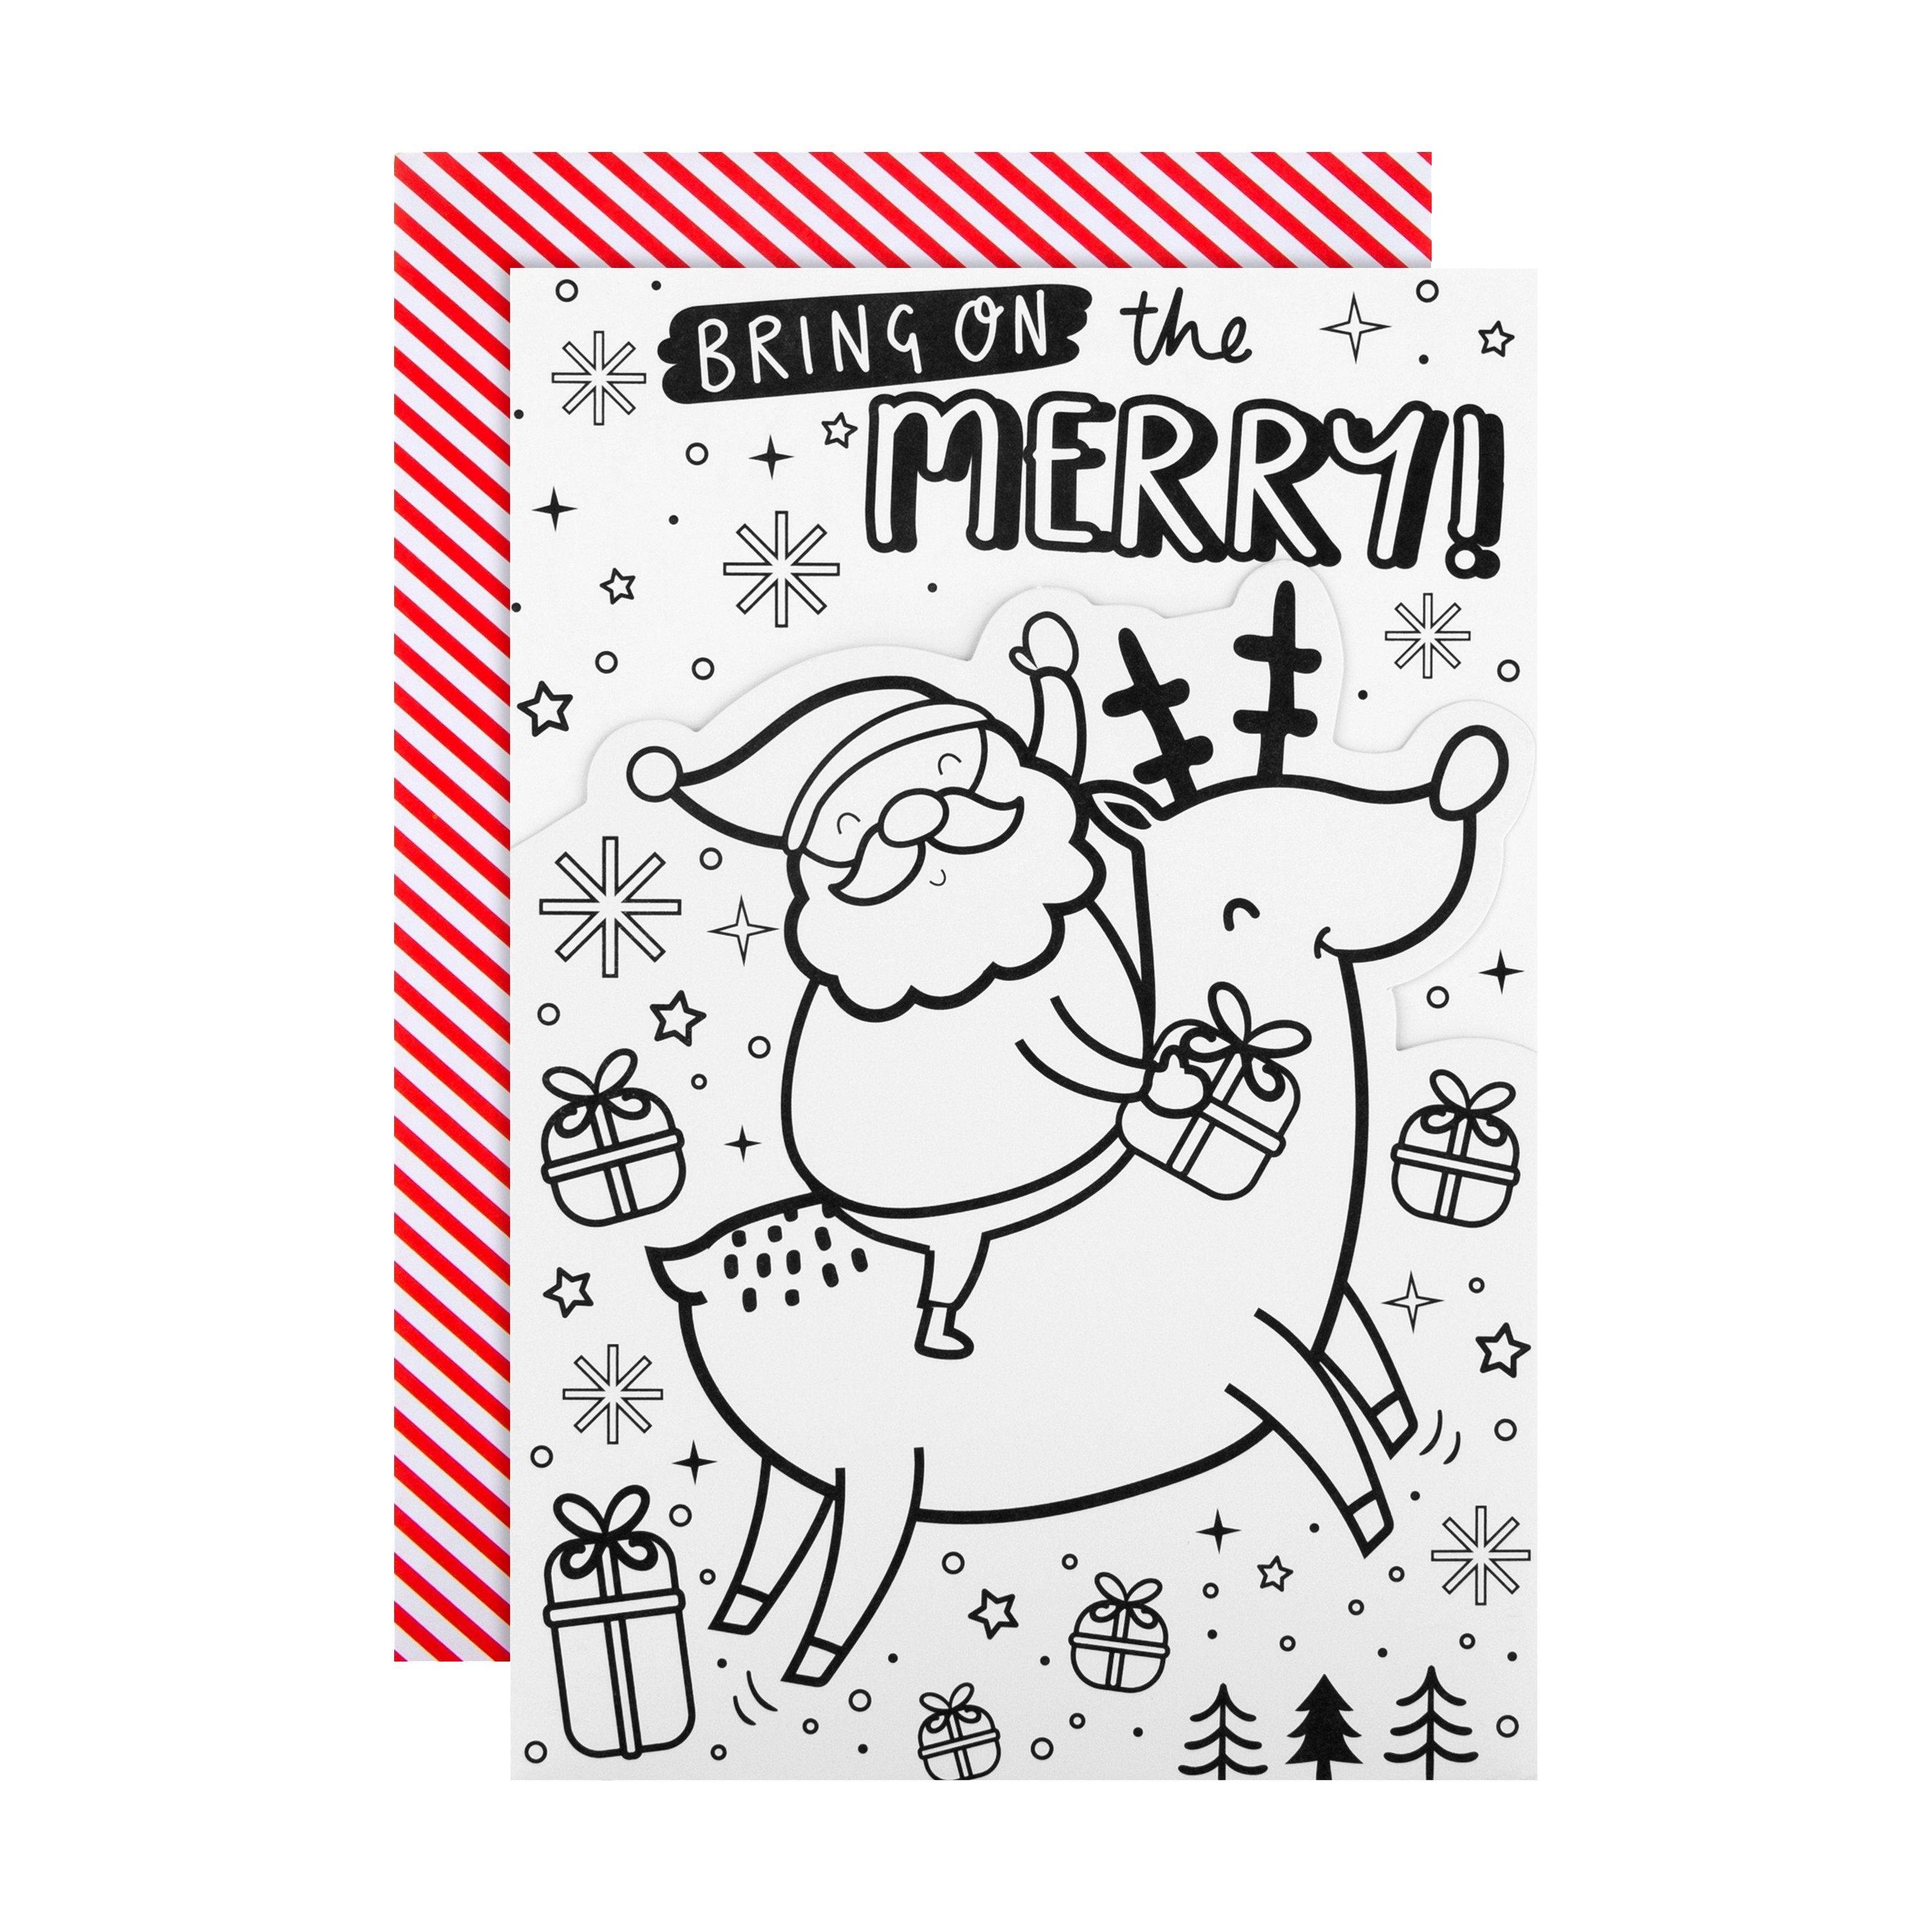 Pinscher Dog Drawing Merry Christmas Greeting Card Dogs Funny Cute,  Illustration Santa Claus Hat Frenchie - Etsy